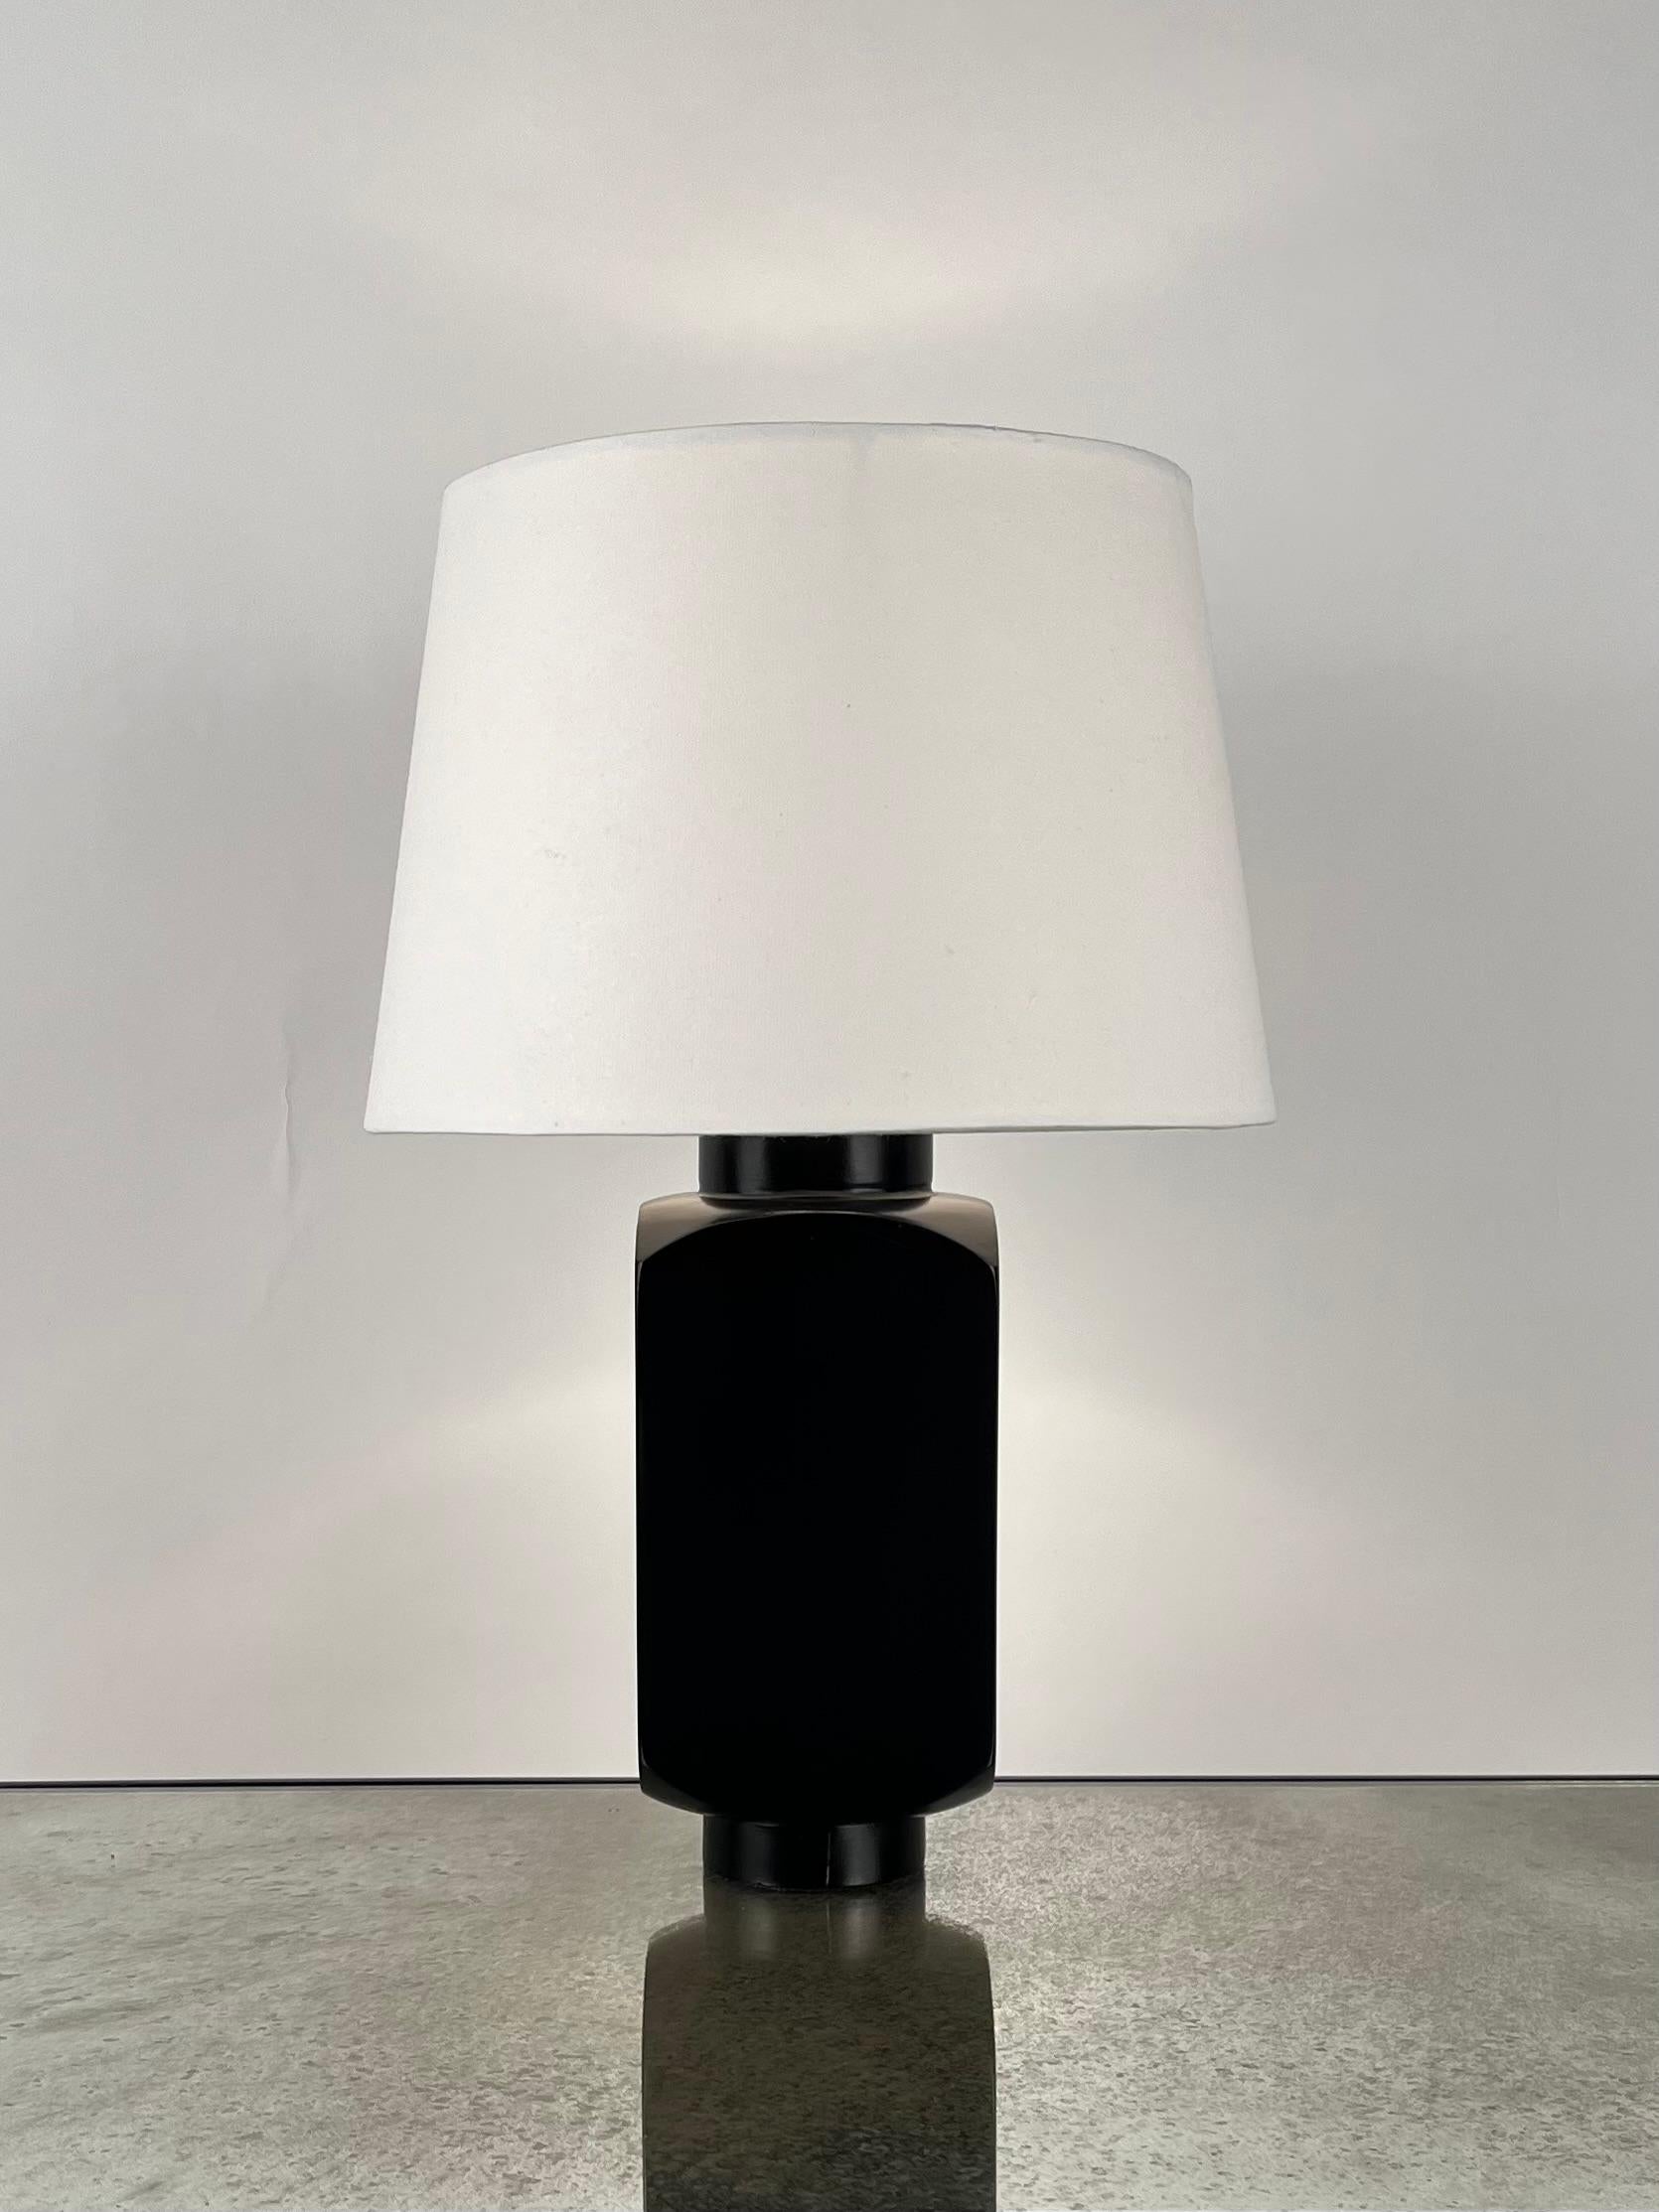 Elegant 'Ébène' table lamp with parchment shades by Design Frères.

Wired with high-end twist cord and 3-way switche (on, half intensity, off.) 40w filament bulb is included in your order. European style parchment shades (no harps or finials)